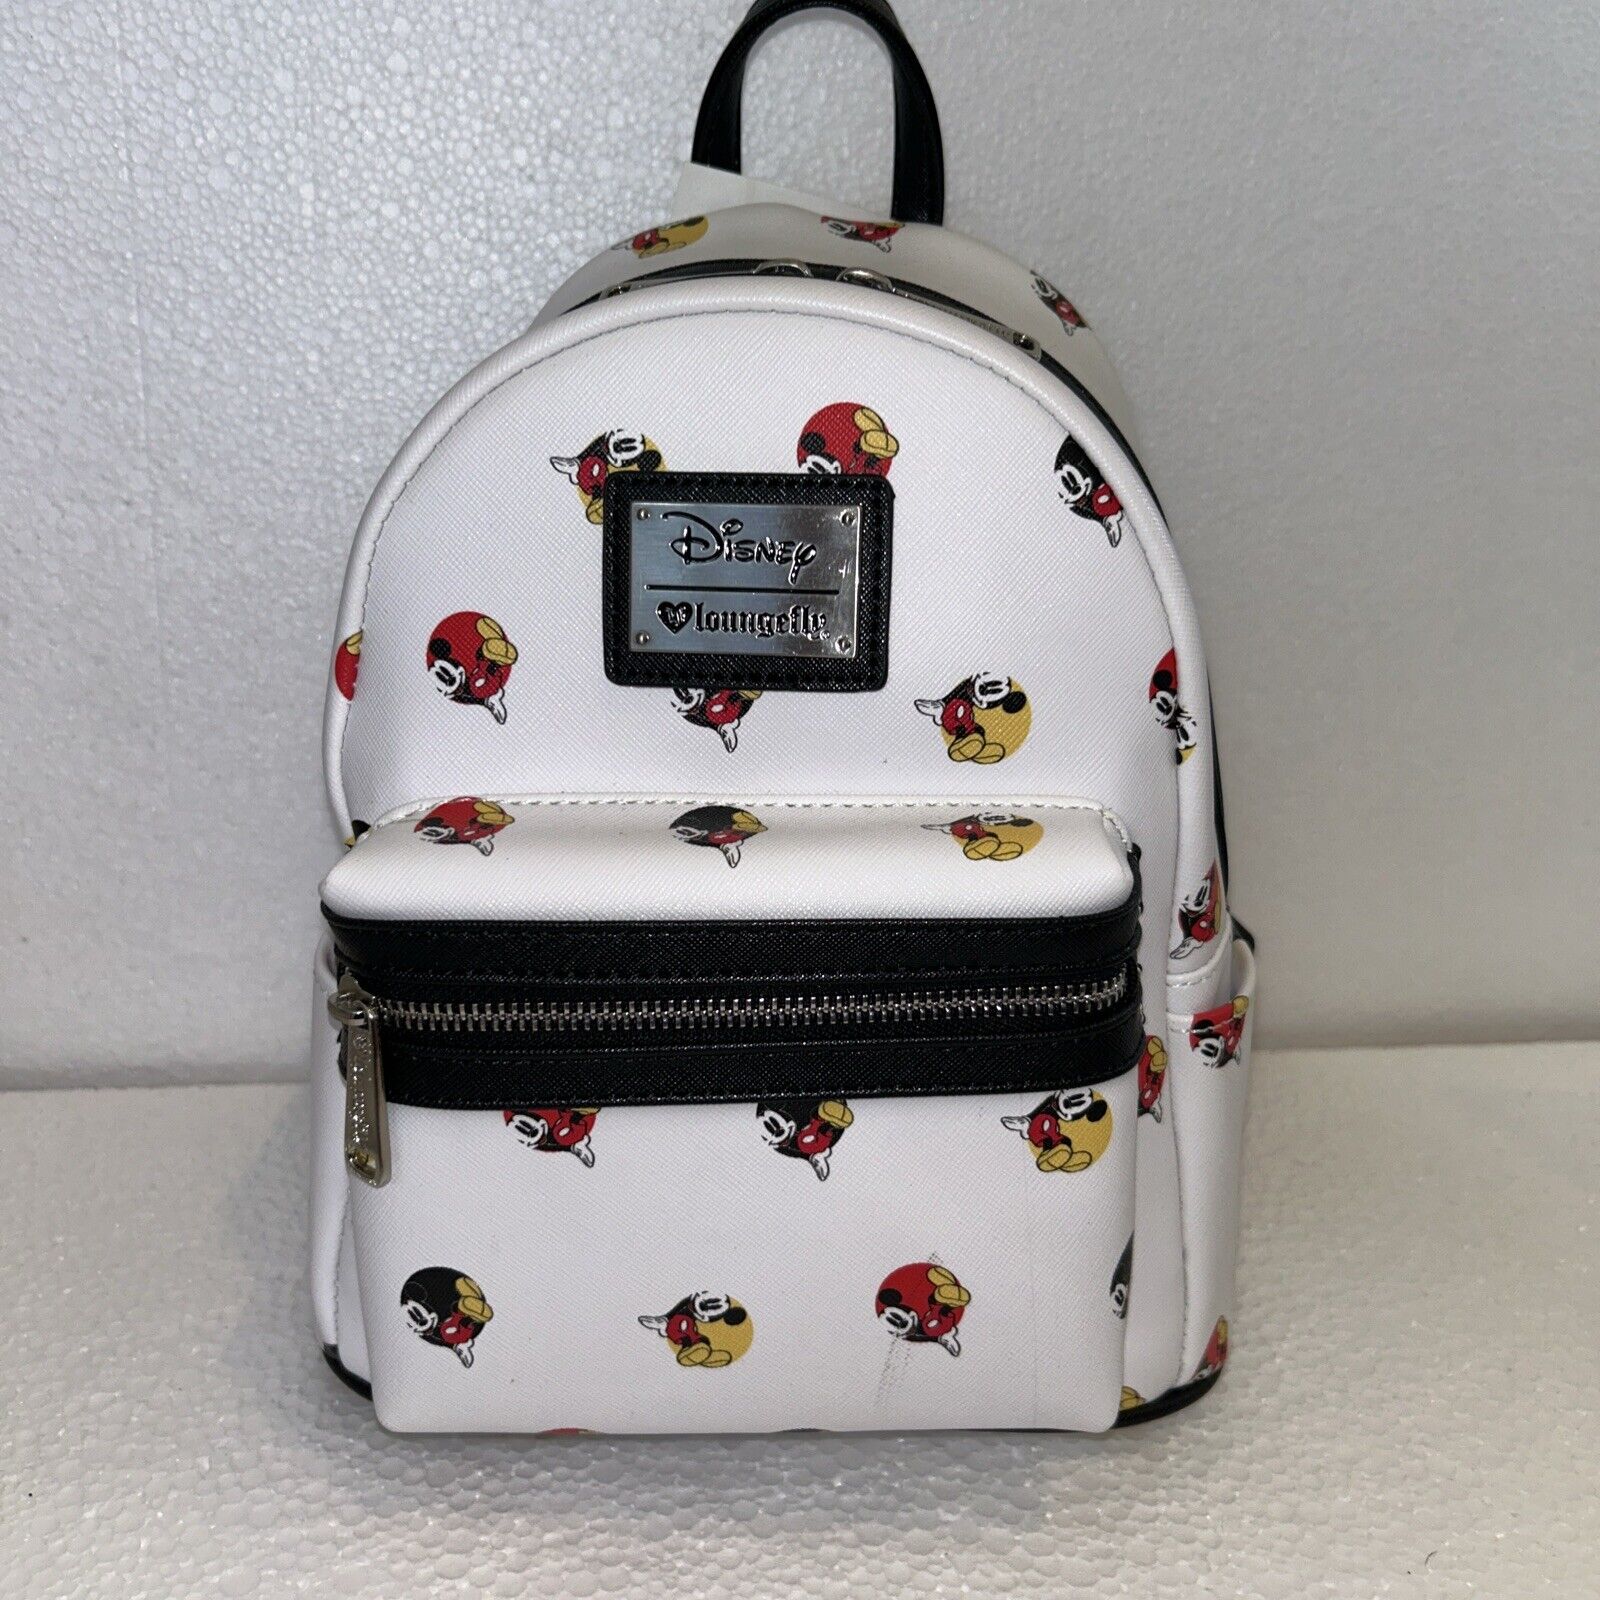 Extremely RARE 2018 Loungefly Mini Backpack BoxLunch Exclusive Mickey Circles